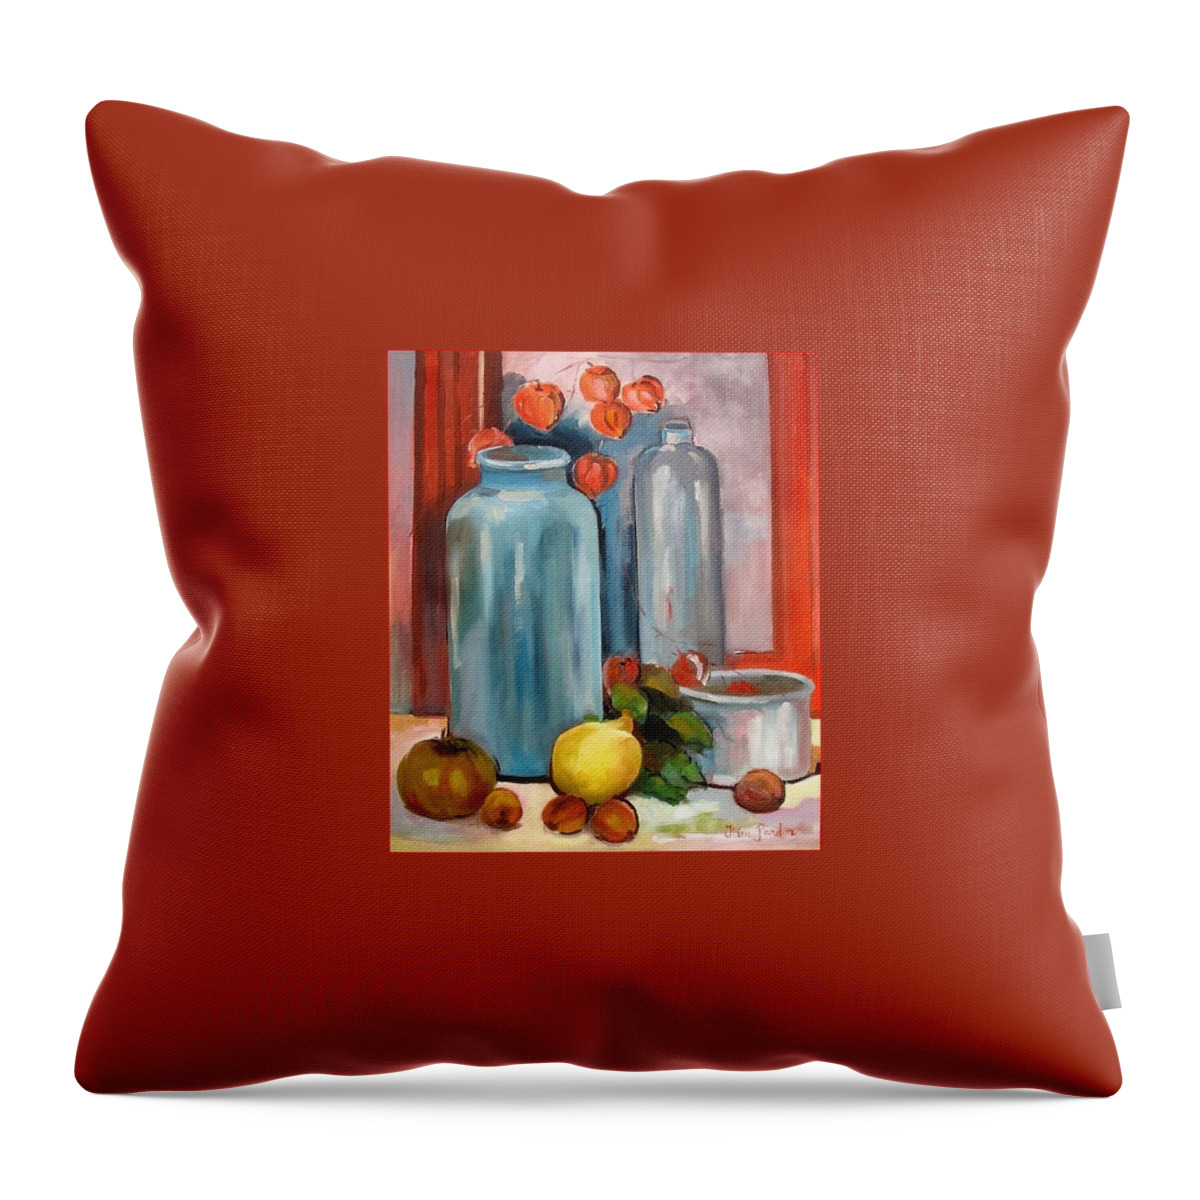  Throw Pillow featuring the painting Pomme d amour by Kim PARDON